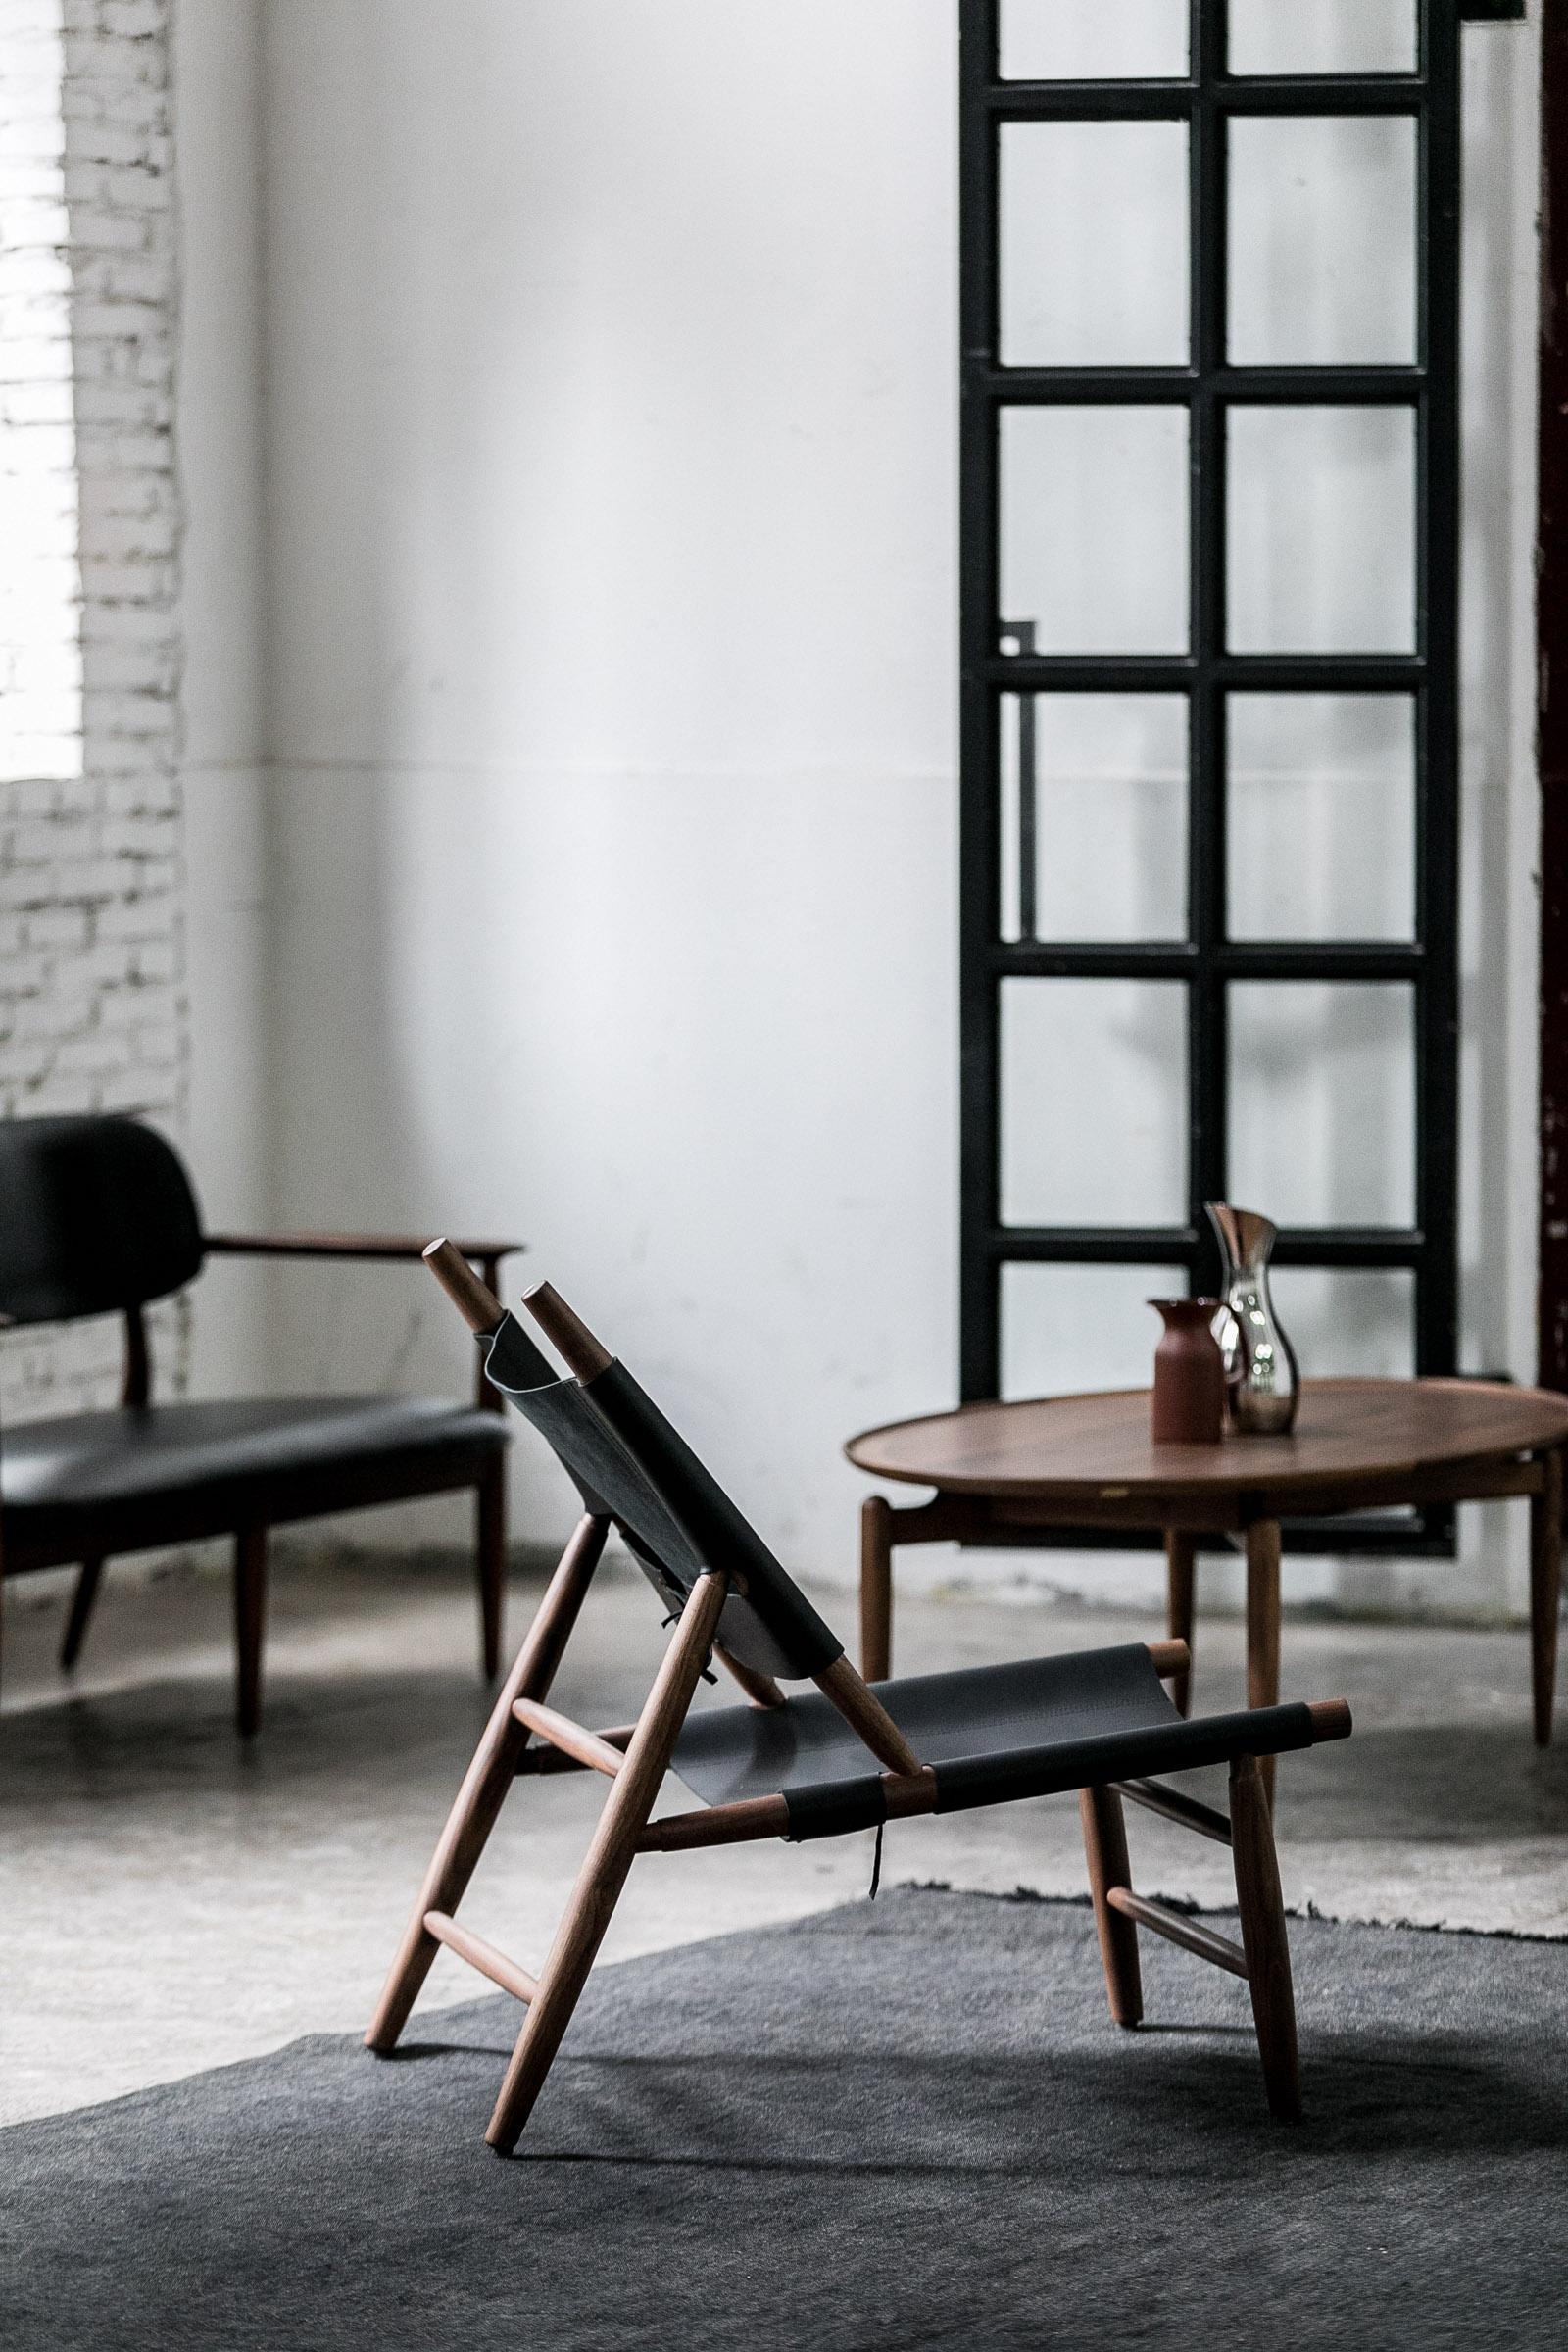 Slow collection consists of a beautifully upholstered wooden furniture that explores the beauty of narrow silhouettes. All items feature narrow legs that elevate and support, striking a perfect balance between mid-century Danish and classic Japanese